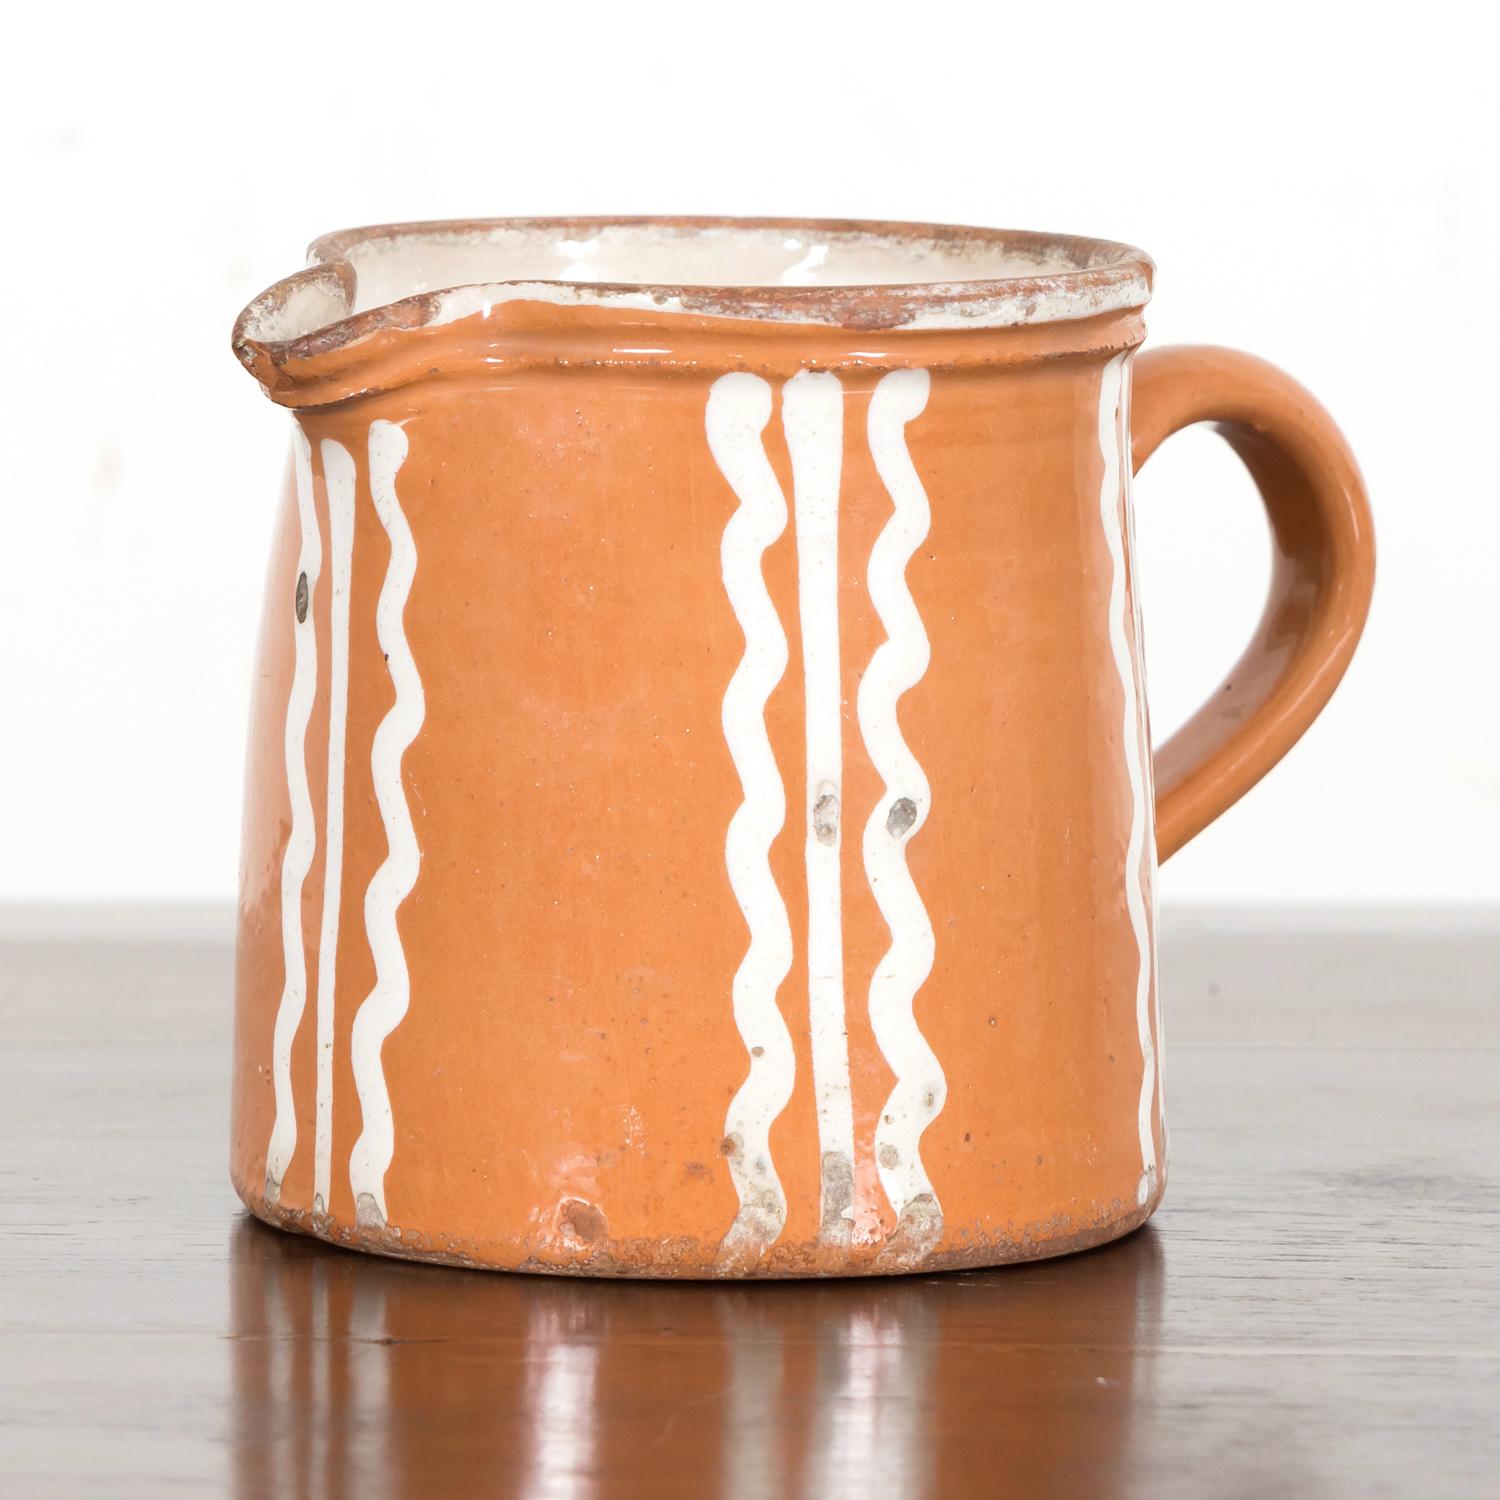 A beautiful 19th century French terracotta jaspé ware pottery pitcher, handcrafted near Annecy, in the Savoie region of France, circa 1870s. Having a large handle and small spout with burnt orange exterior glaze featuring hand painted cream colored